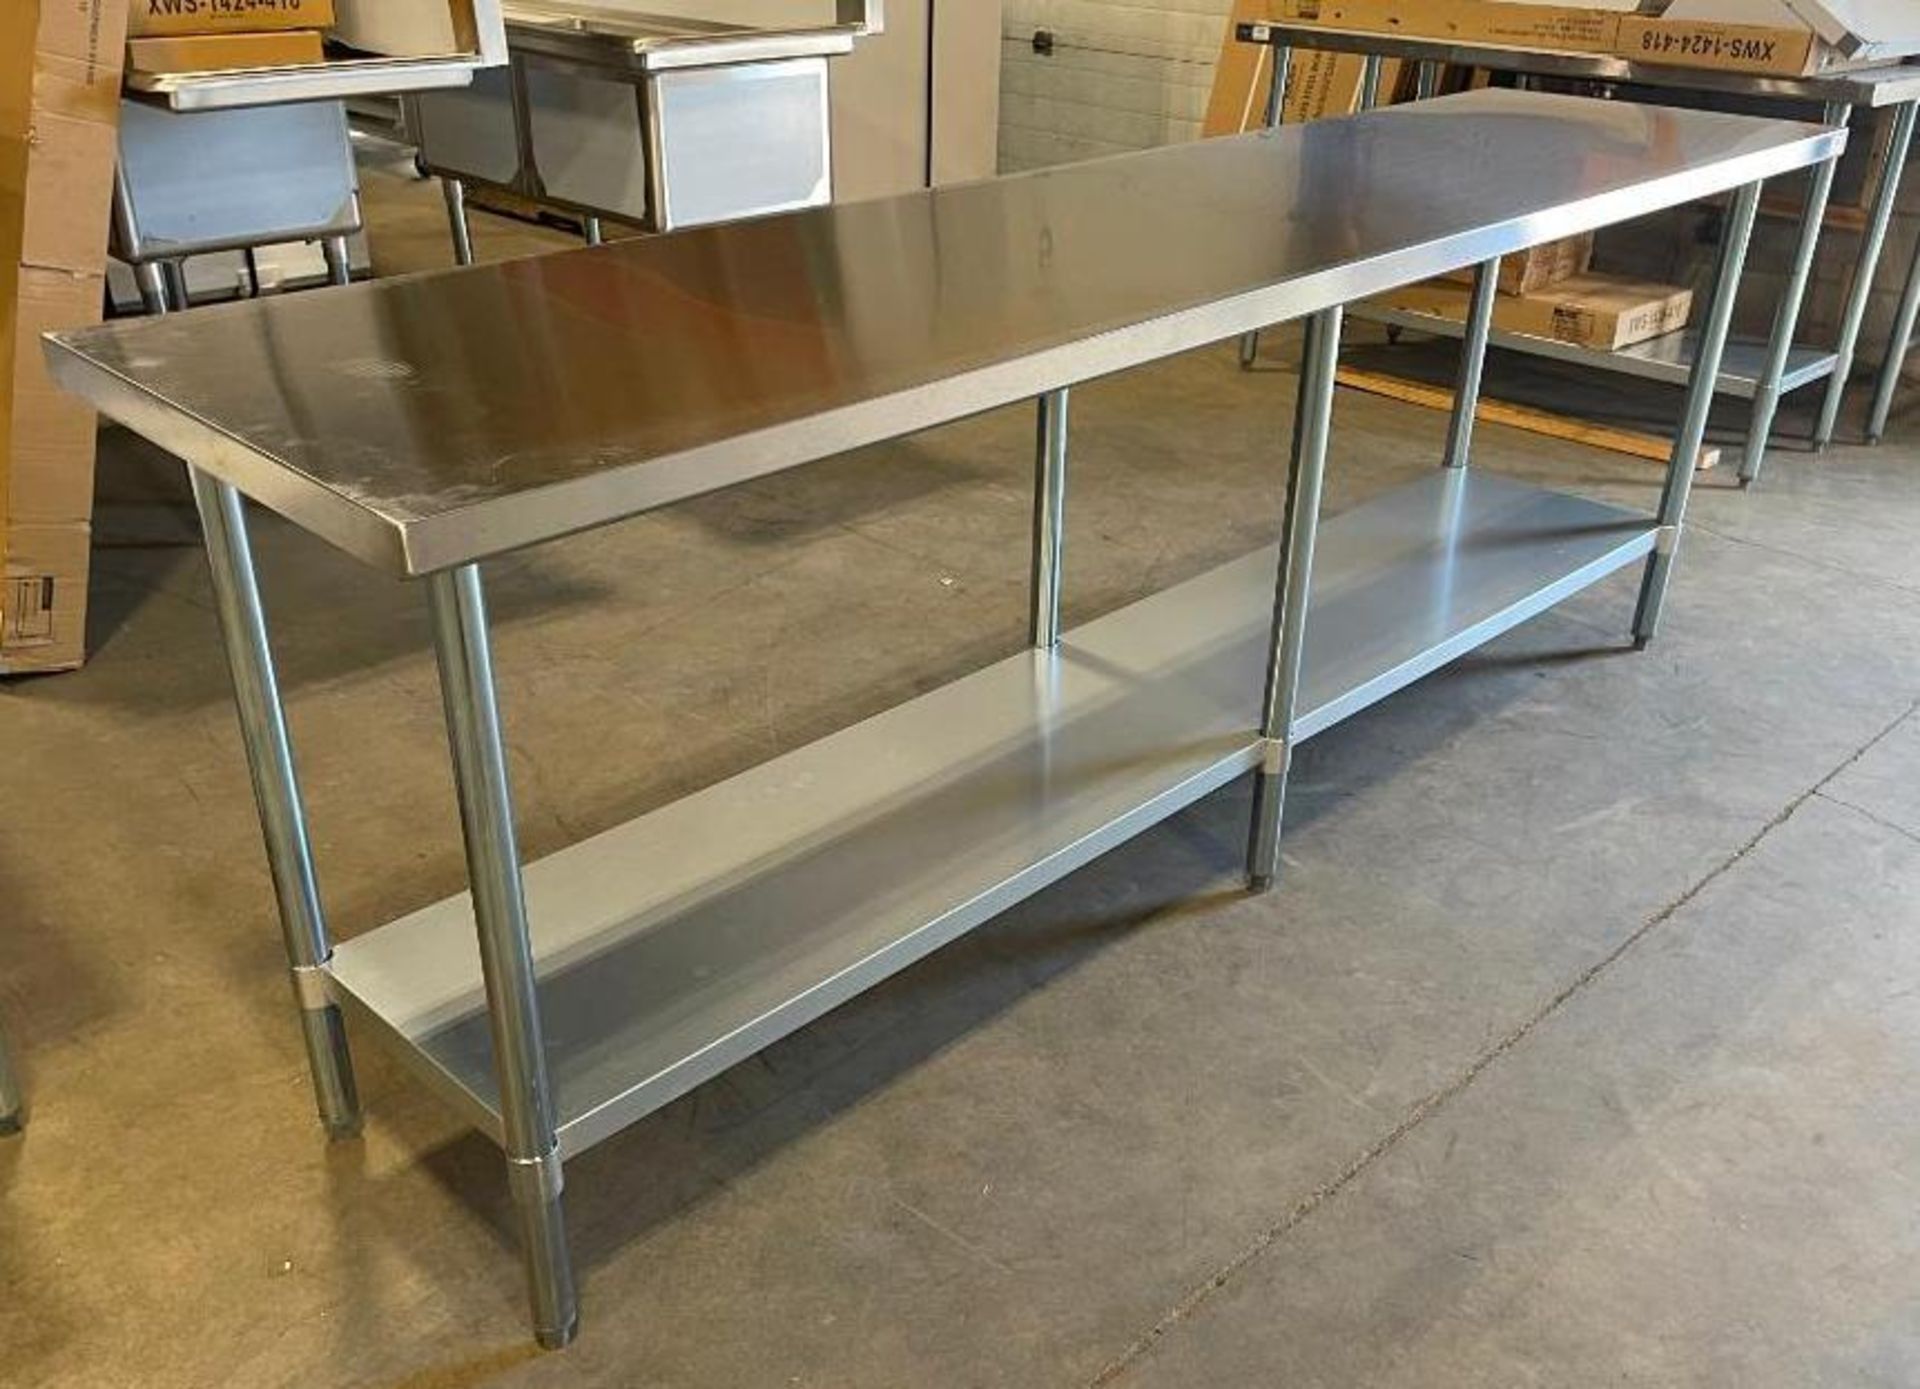 NEW 24" X 96" STAINLESS STEEL WORK TABLE WITH UNDERSHELF - Image 2 of 8